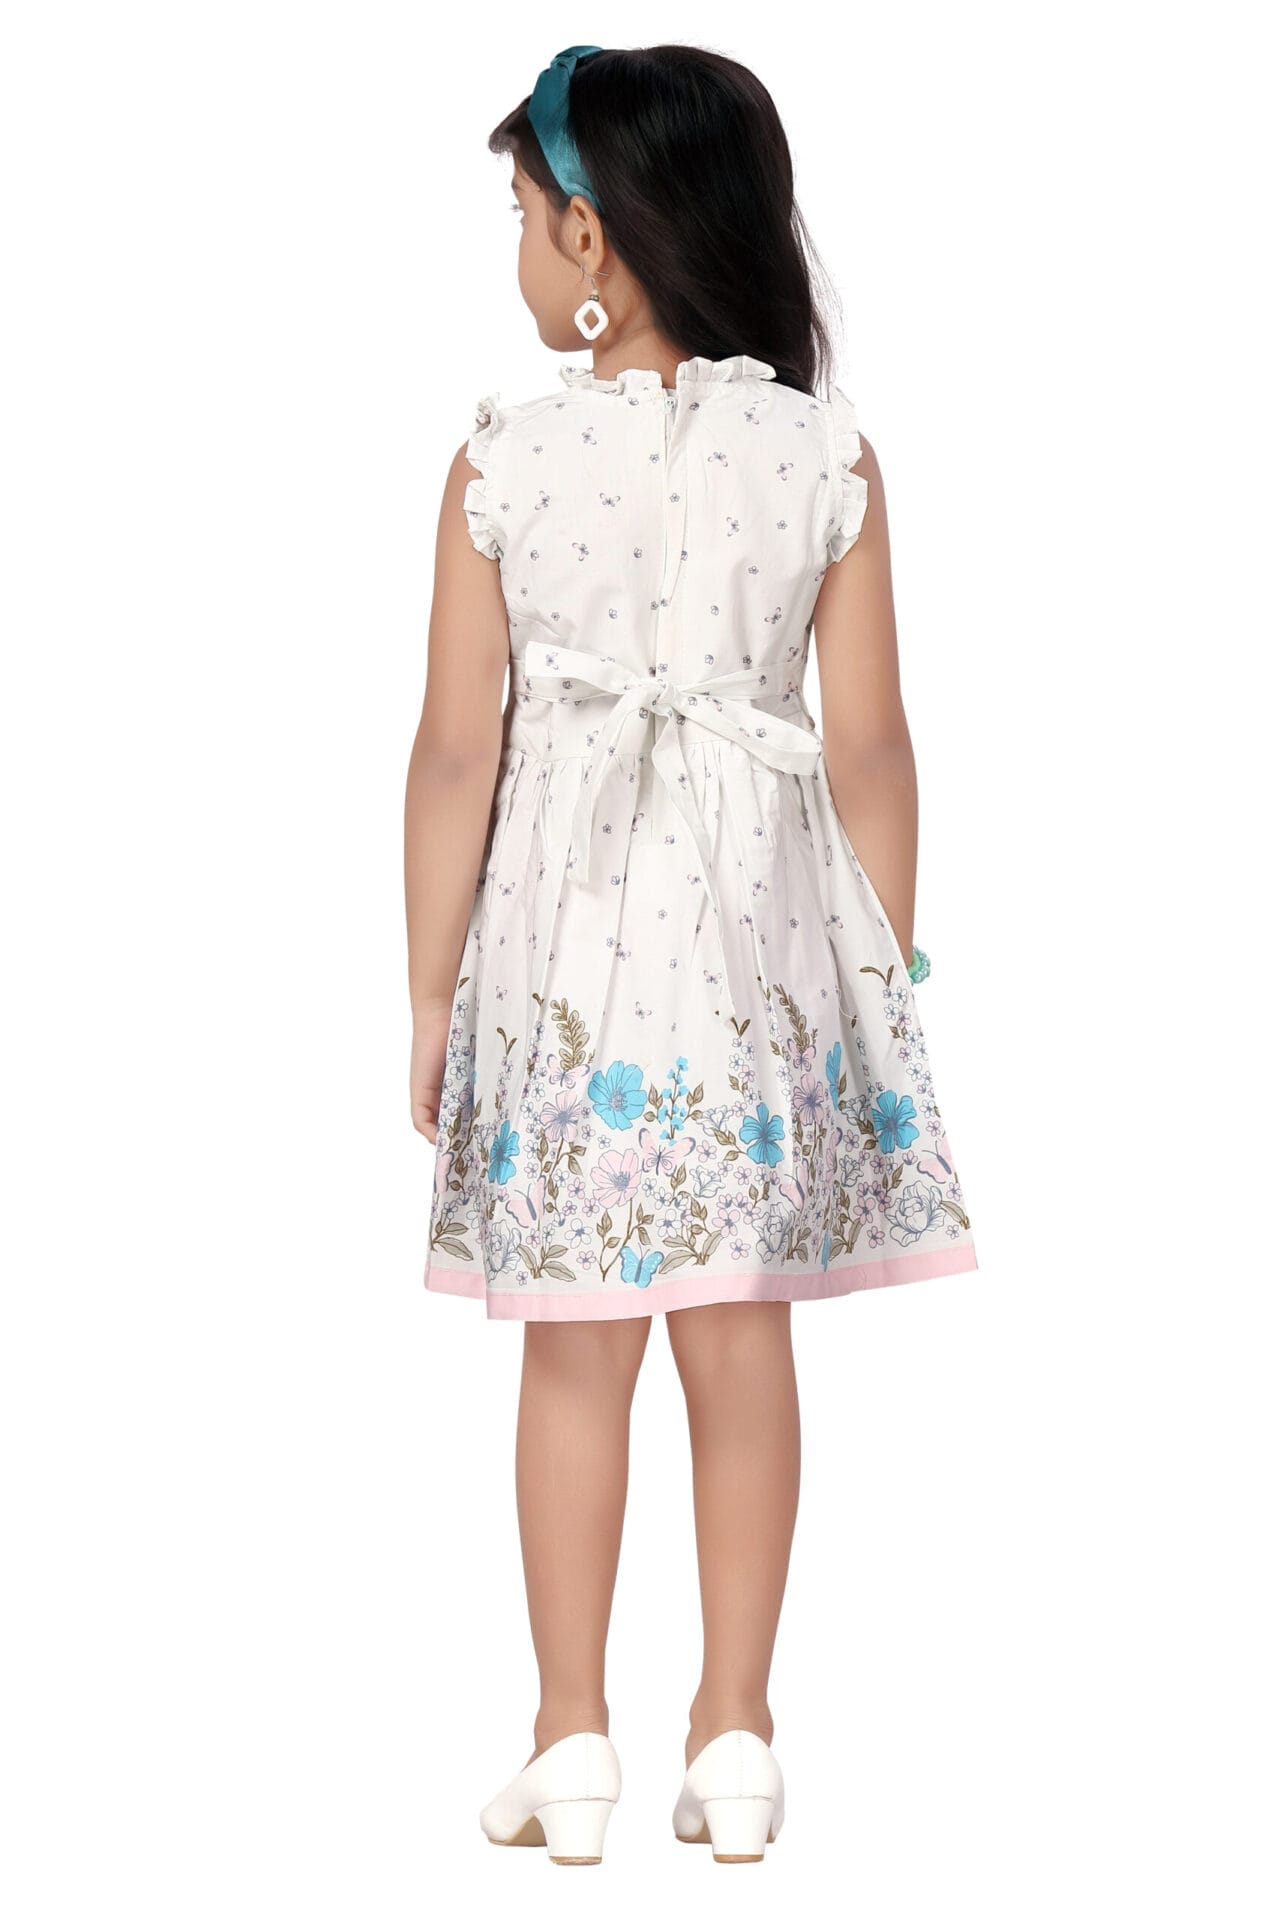 Trends in Party Wear Dresses for Girls this Season - Mumkins